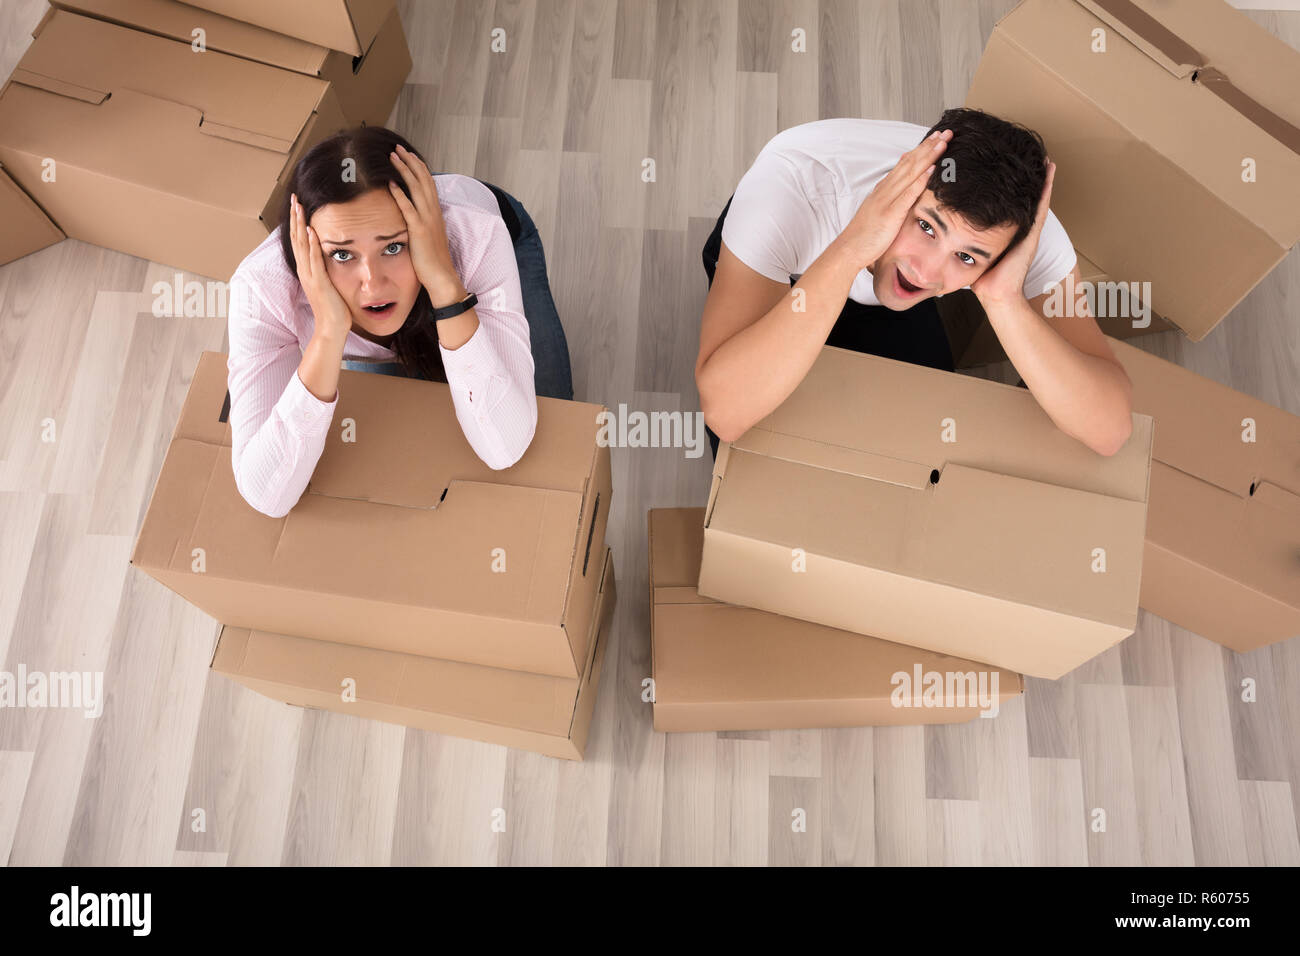 Couple Screaming Behind The Cardboard Boxes Stock Photo